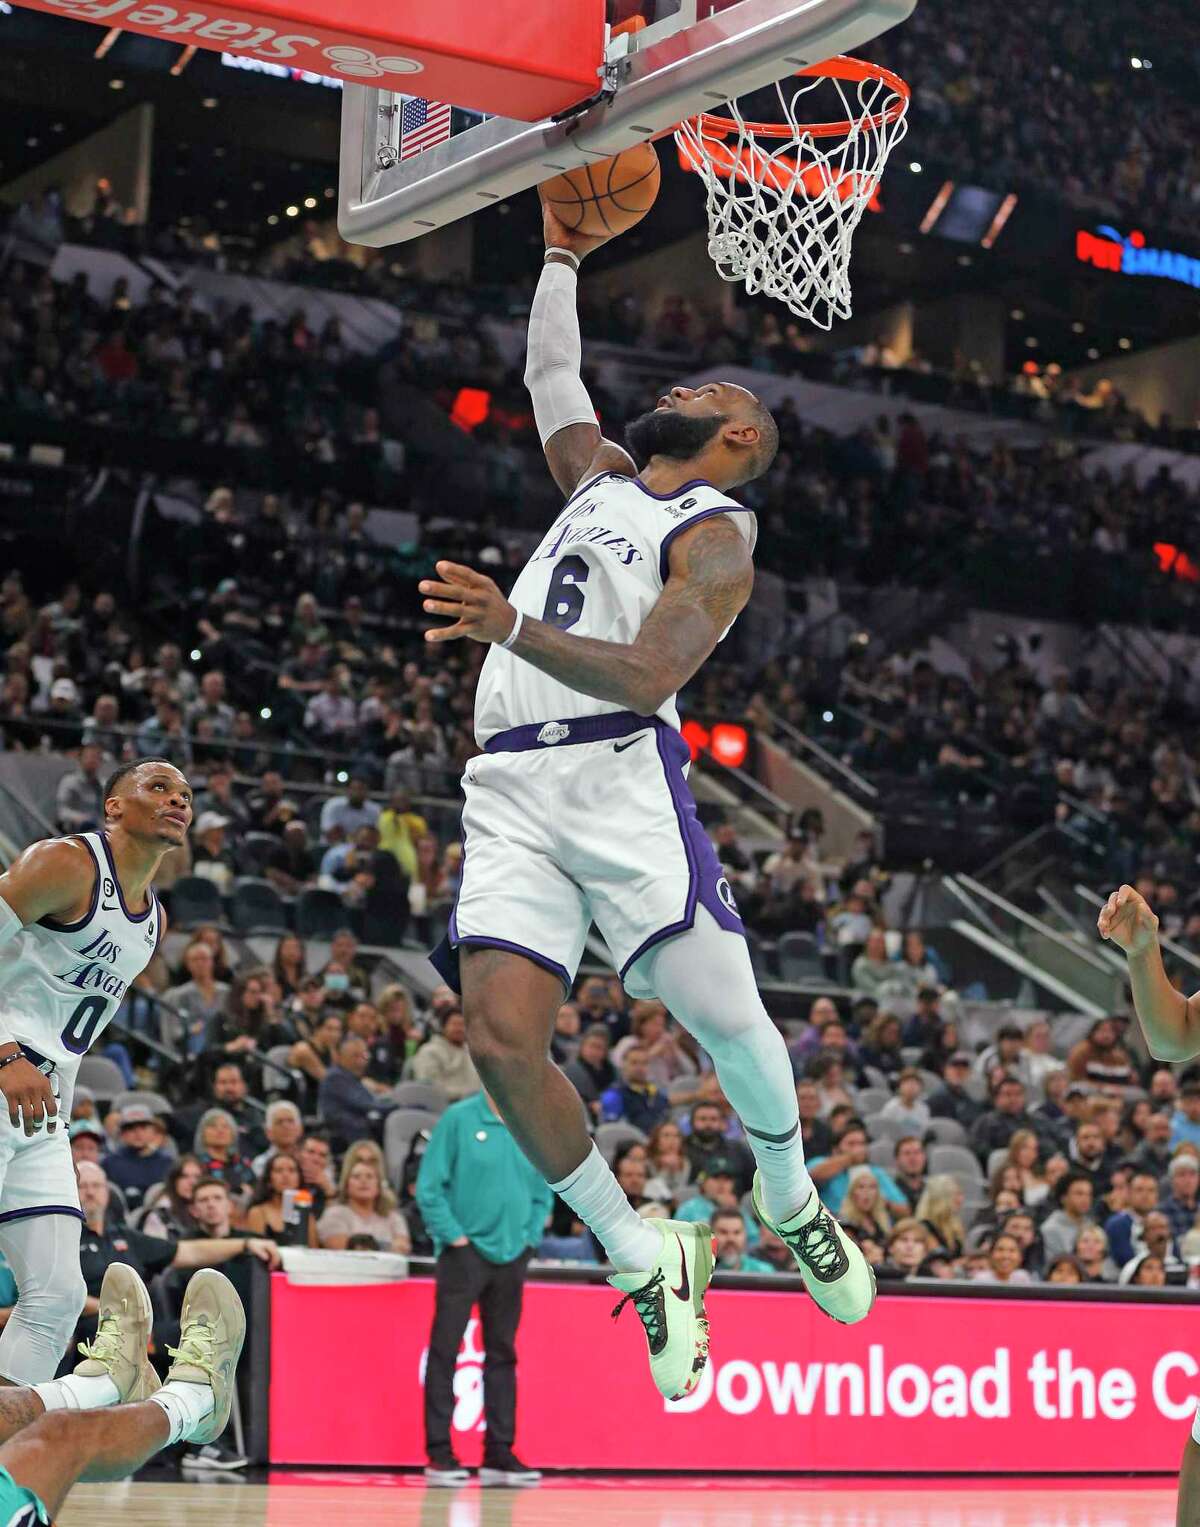 SAN ANTONIO, TX - NOVEMBER 25: LeBron James #6 of the Los Angeles Lakers scores against the San Antonio Spurs in the first half at AT&T Center on November 25, 2022 in San Antonio, Texas. NOTE TO USER: User expressly acknowledges and agrees that, by downloading and or using this photograph, User is consenting to terms and conditions of the Getty Images License Agreement. (Photo by Ronald Cortes/Getty Images)